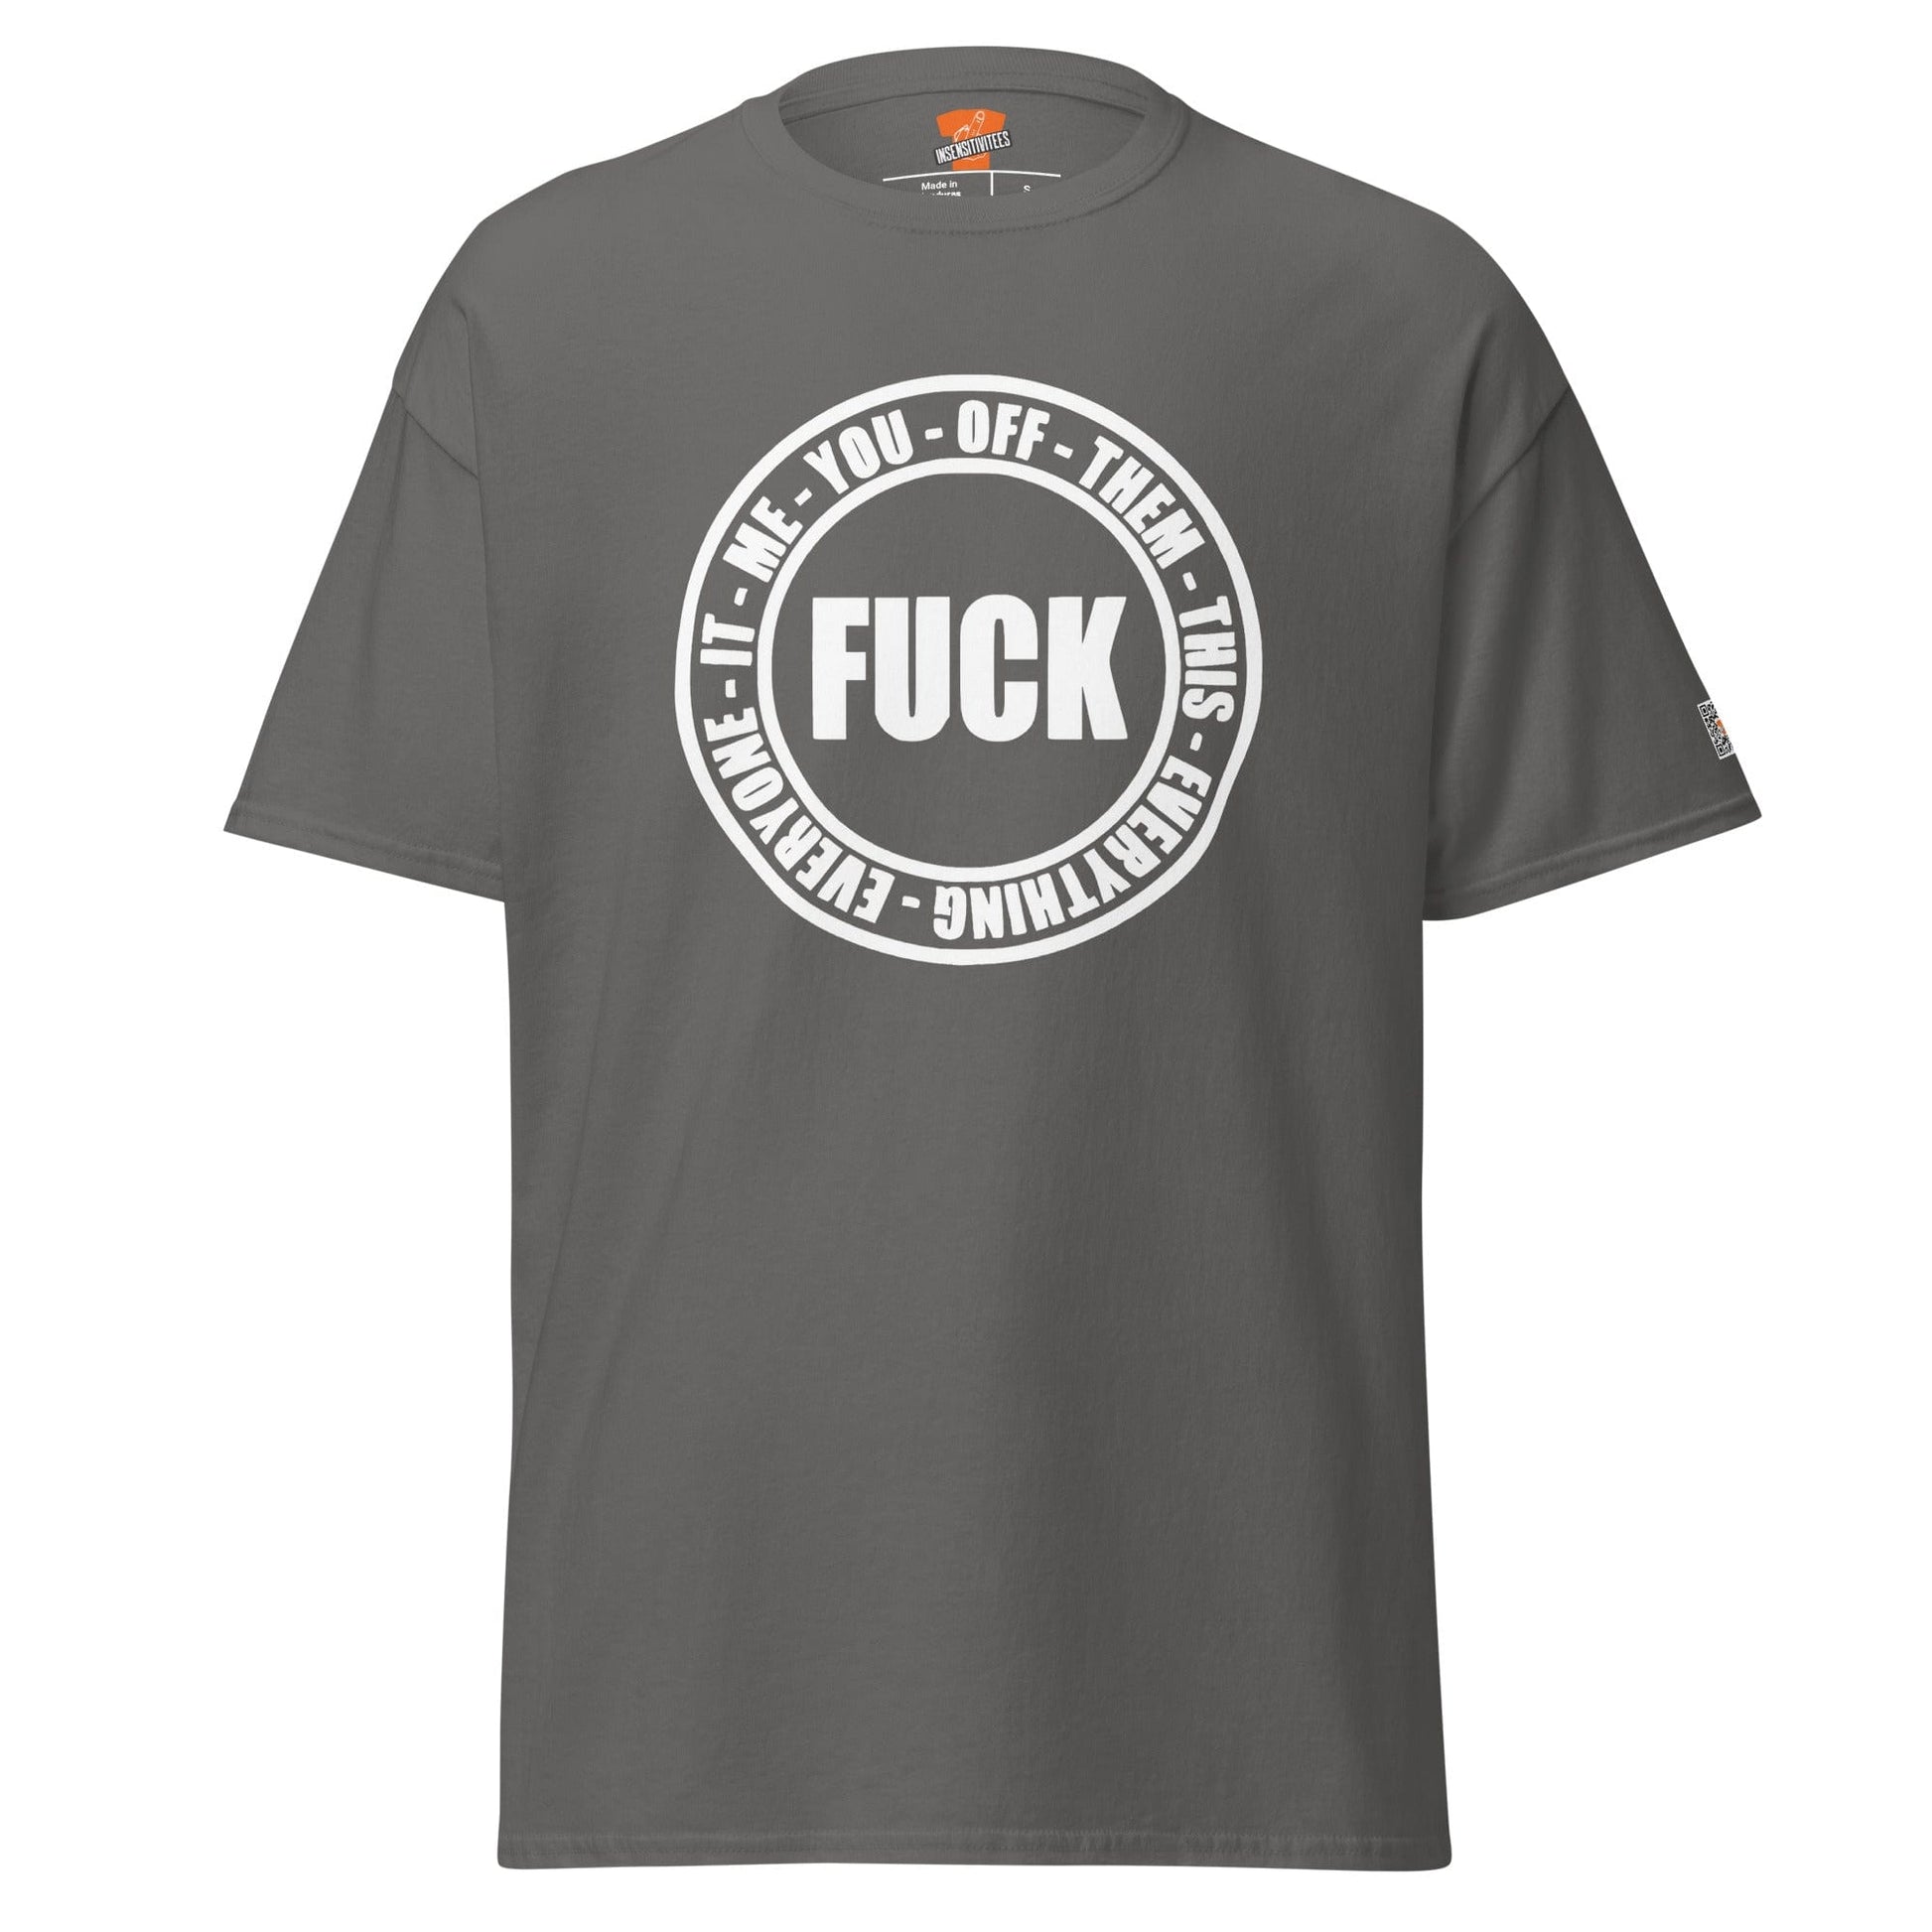 InsensitiviTees™️ Charcoal / S Fuck Everything Unisex T-shirt